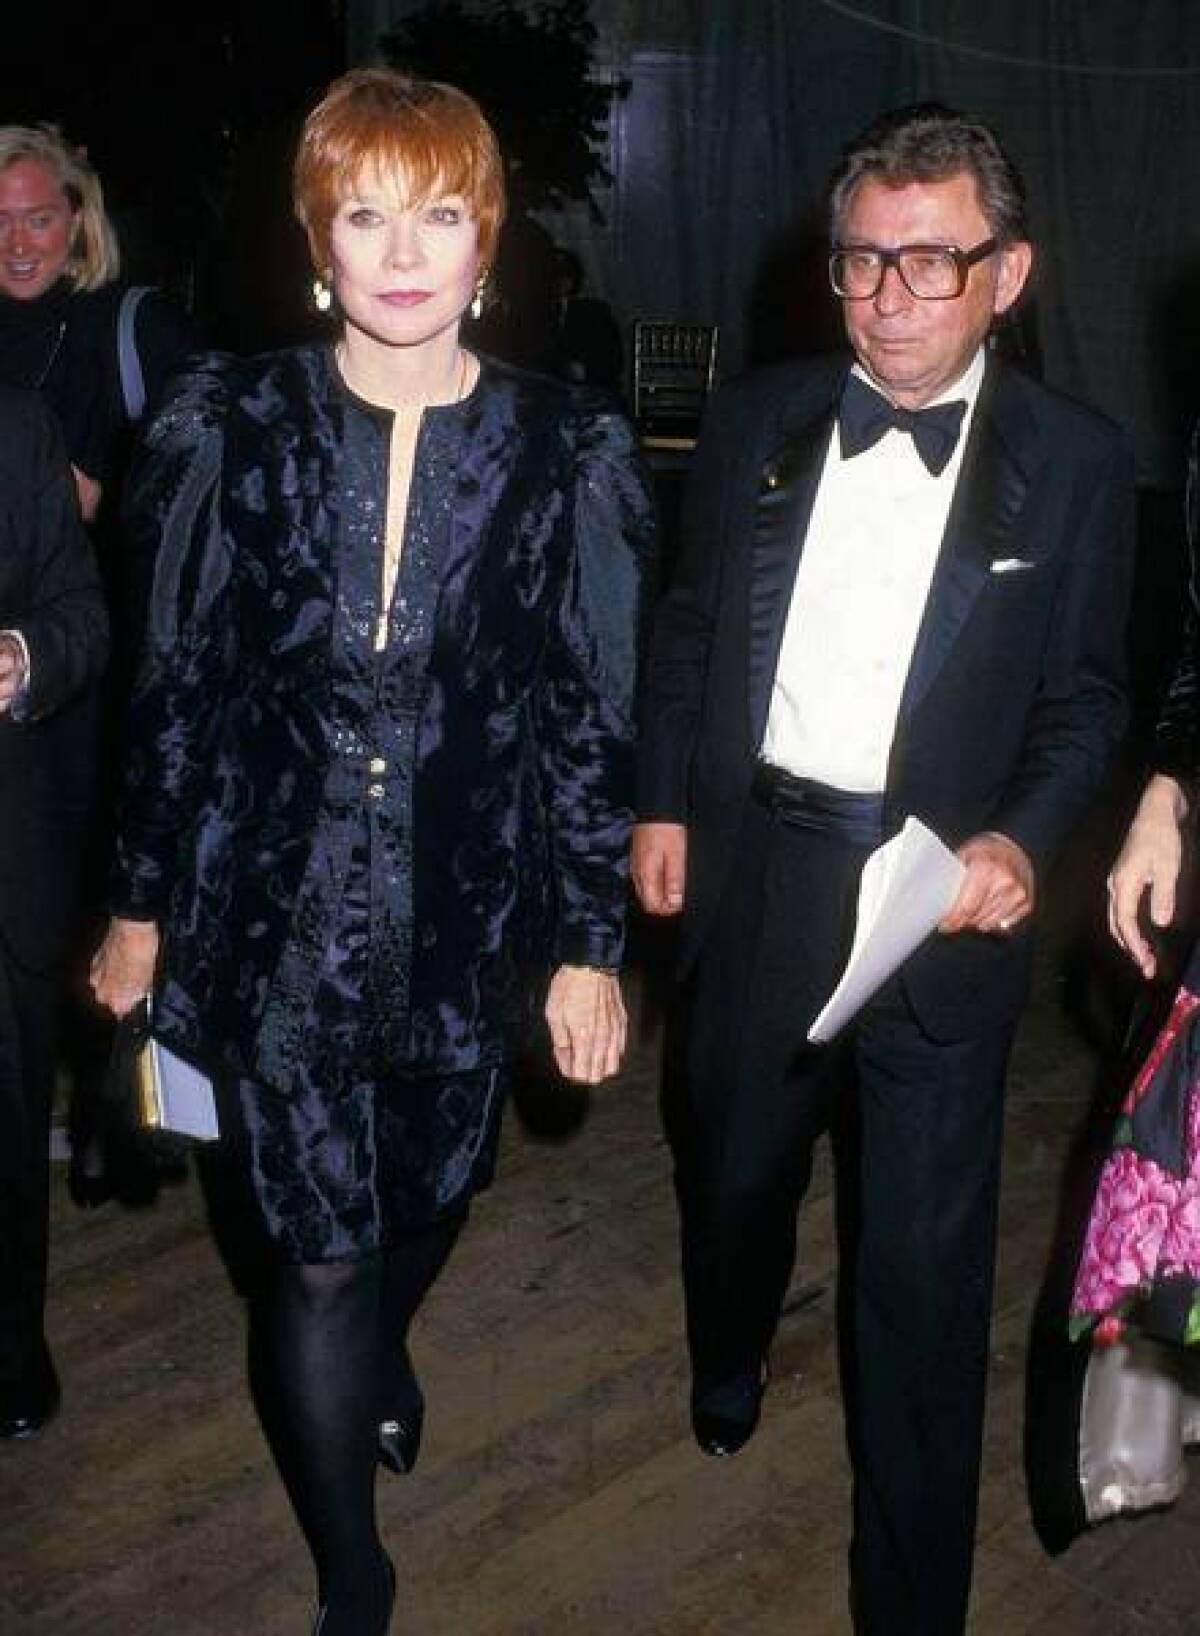 Dale Olson is shown with Shirley MacLaine in 1988. He had helped craft the successful Oscar campaign for her performance in “Terms of Endearment.”